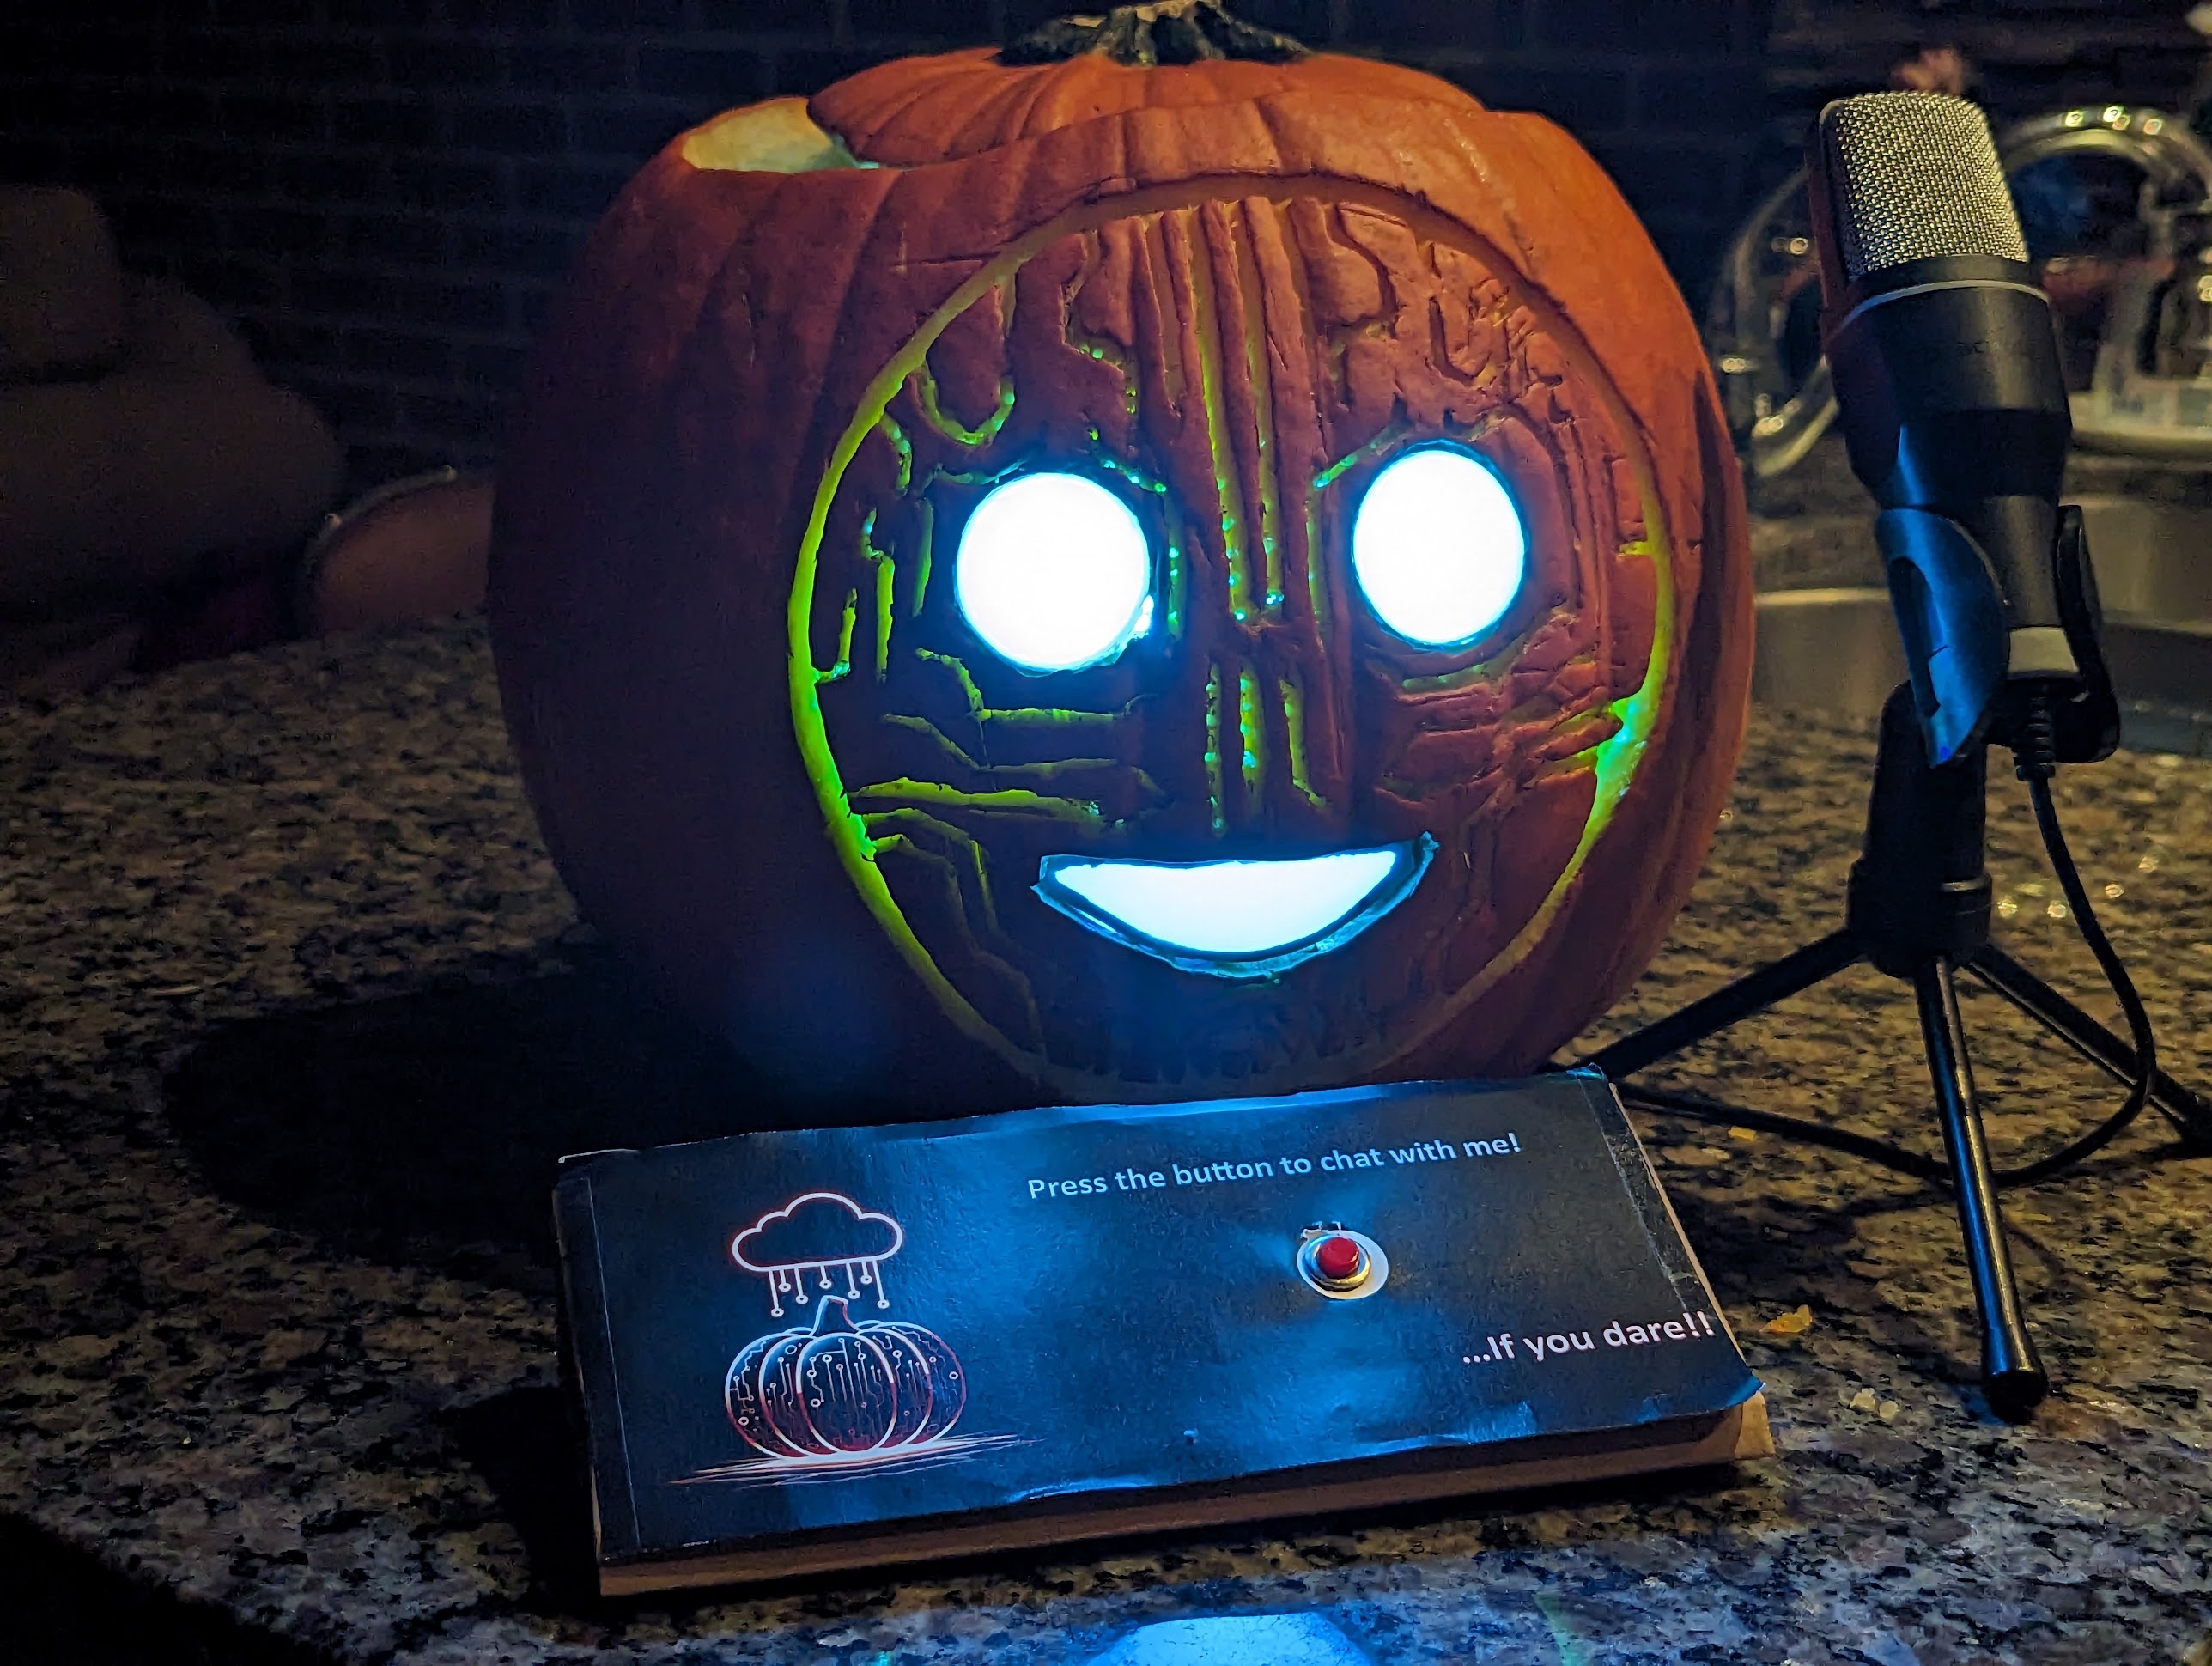 A picture of a jackolantern with an artificial looking smile. circuit traces are carved it is face. Its blank eyes and mouth glow blue. In front of it sits a button panel that says 'Press the button to chat with me... if you dare!